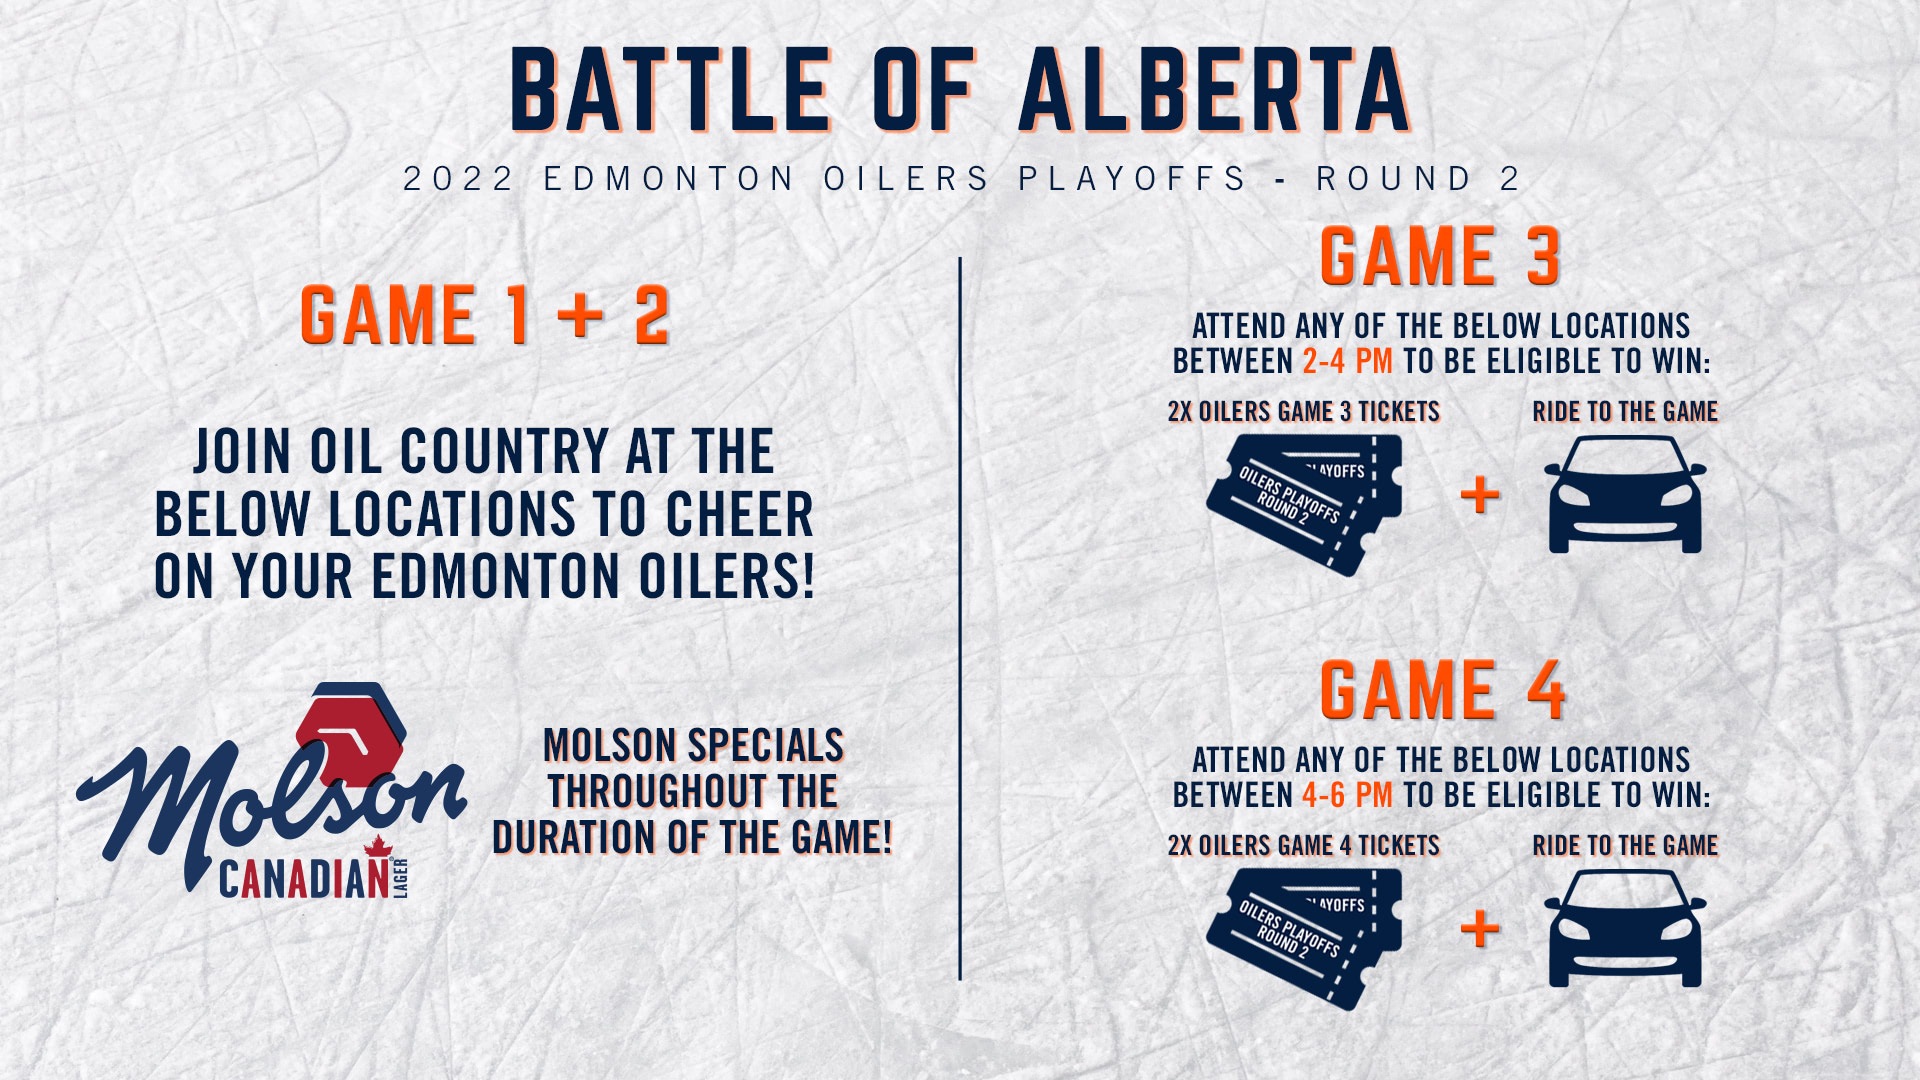 Game 1 & 2: Join Oil Country at the below locations to cheer on your Edmonton Oilers! Enjoy Molson specials throughout the duration of the game! Game 3: Attend any of the below locations between 2-4 PM to be eligible to win 2X Oilers game 3 tickets and a ride to the game. Game 4: Attend any of the below locations between 4-6 PM to be eligible to win 2X Oilers game 4 tickets and a ride to the game.